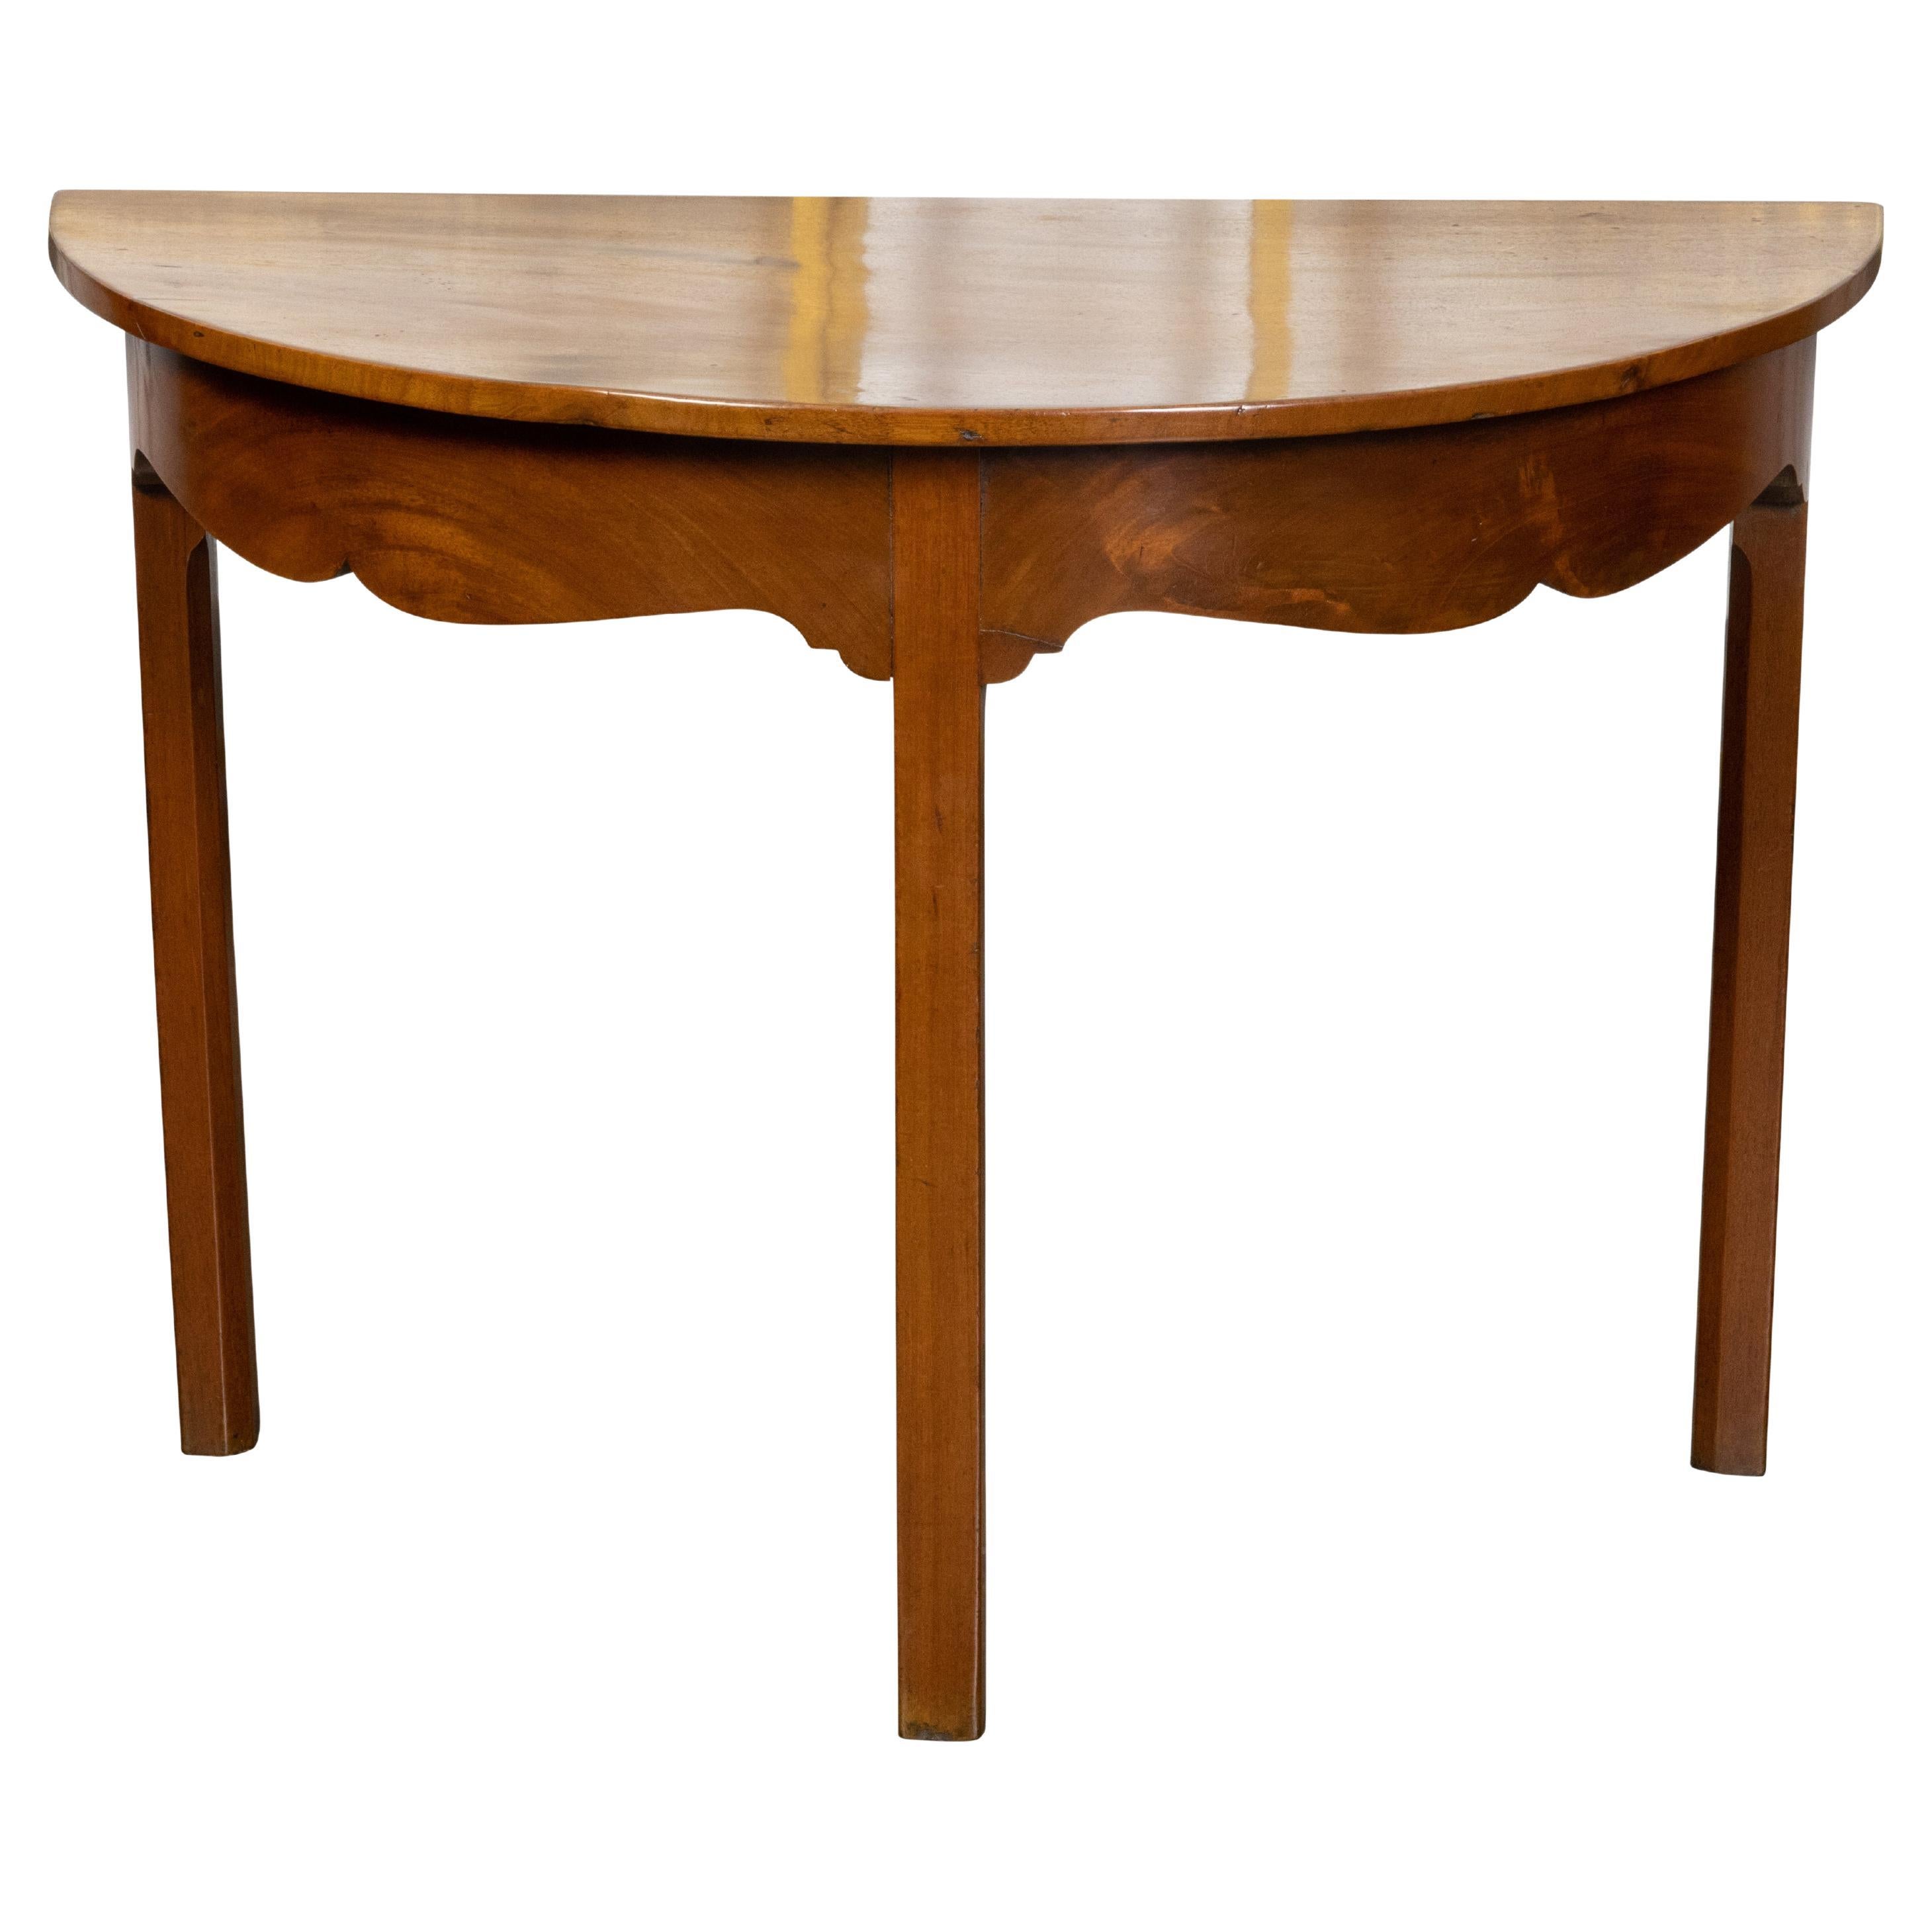 English 19th Century Mahogany Demilune Table with Carved Apron and Straight Legs For Sale